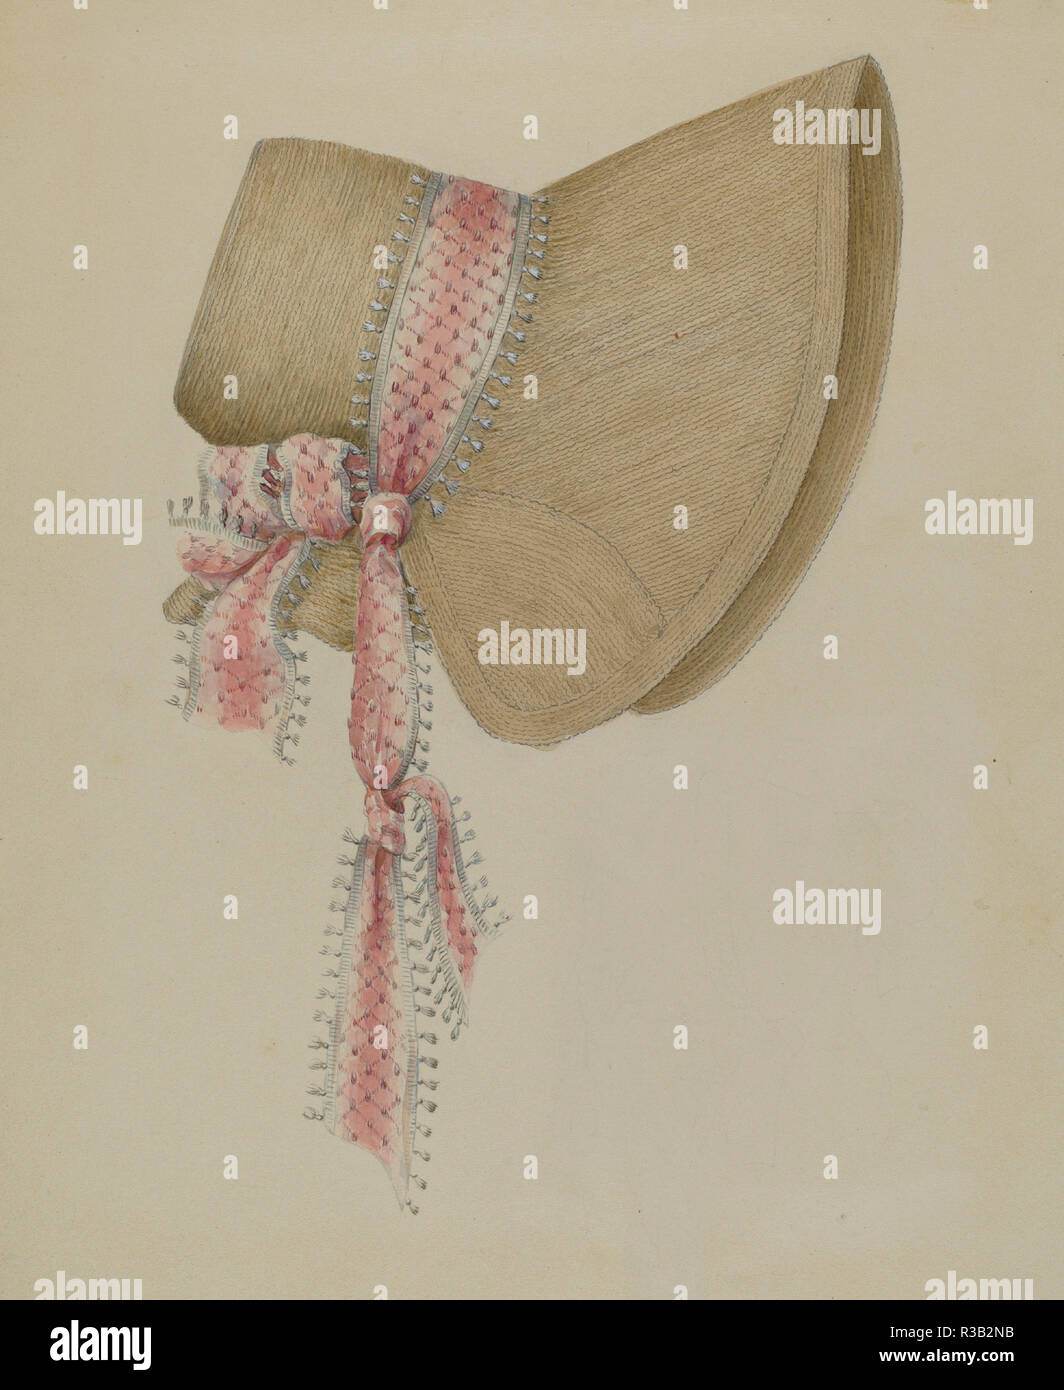 Bonnet. Dated: c. 1937. Dimensions: overall: 28.9 x 22.5 cm (11 3/8 x 8 7/8 in.). Medium: watercolor and graphite on paperboard. Museum: National Gallery of Art, Washington DC. Author: Jessie M. Benge. Stock Photo